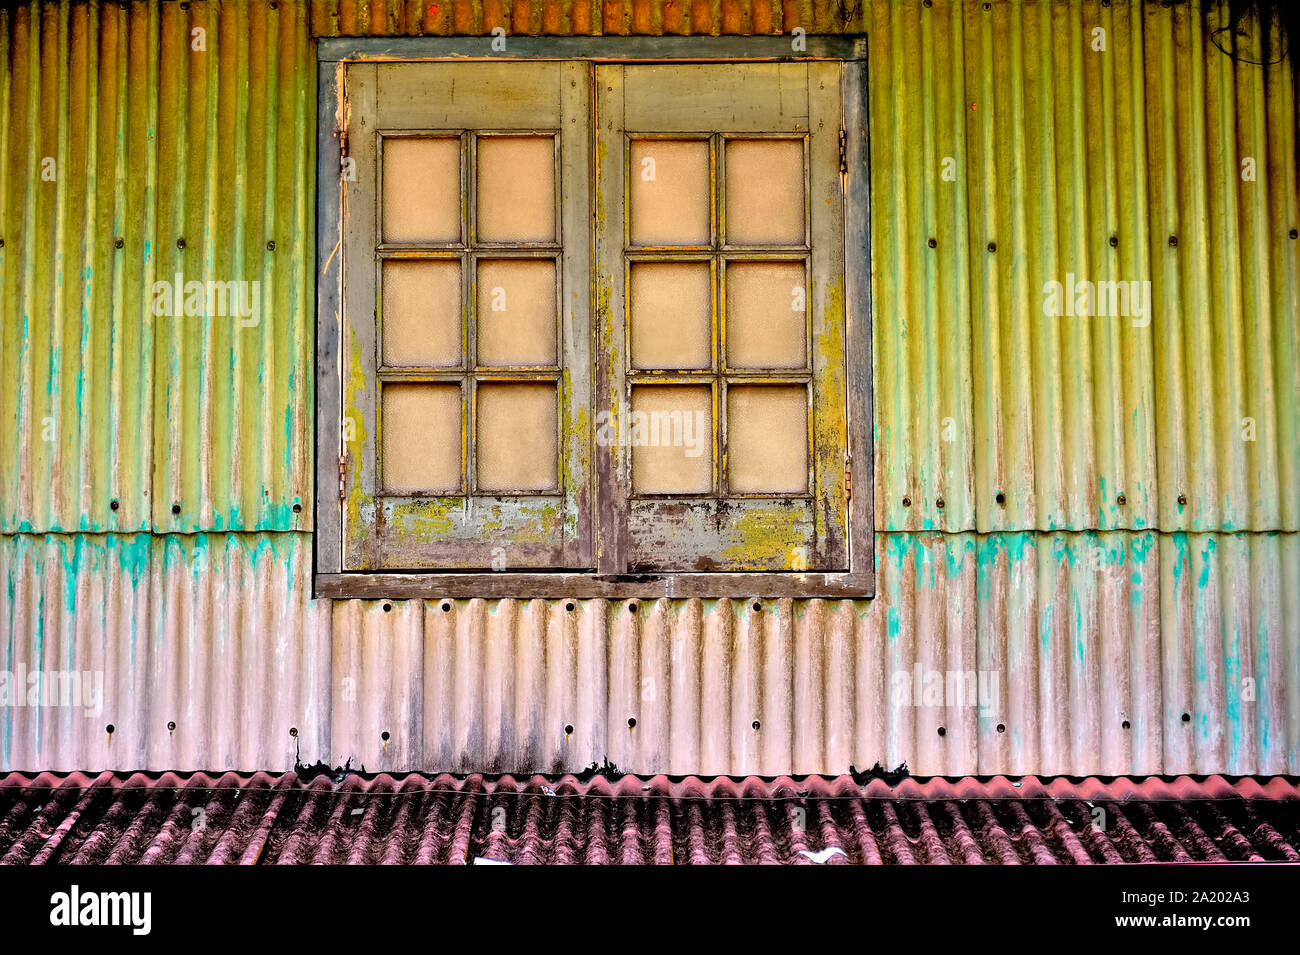 Antique window with brown wooden shutters on corrugated metal exterior of house in Geylang, Singapore Stock Photo